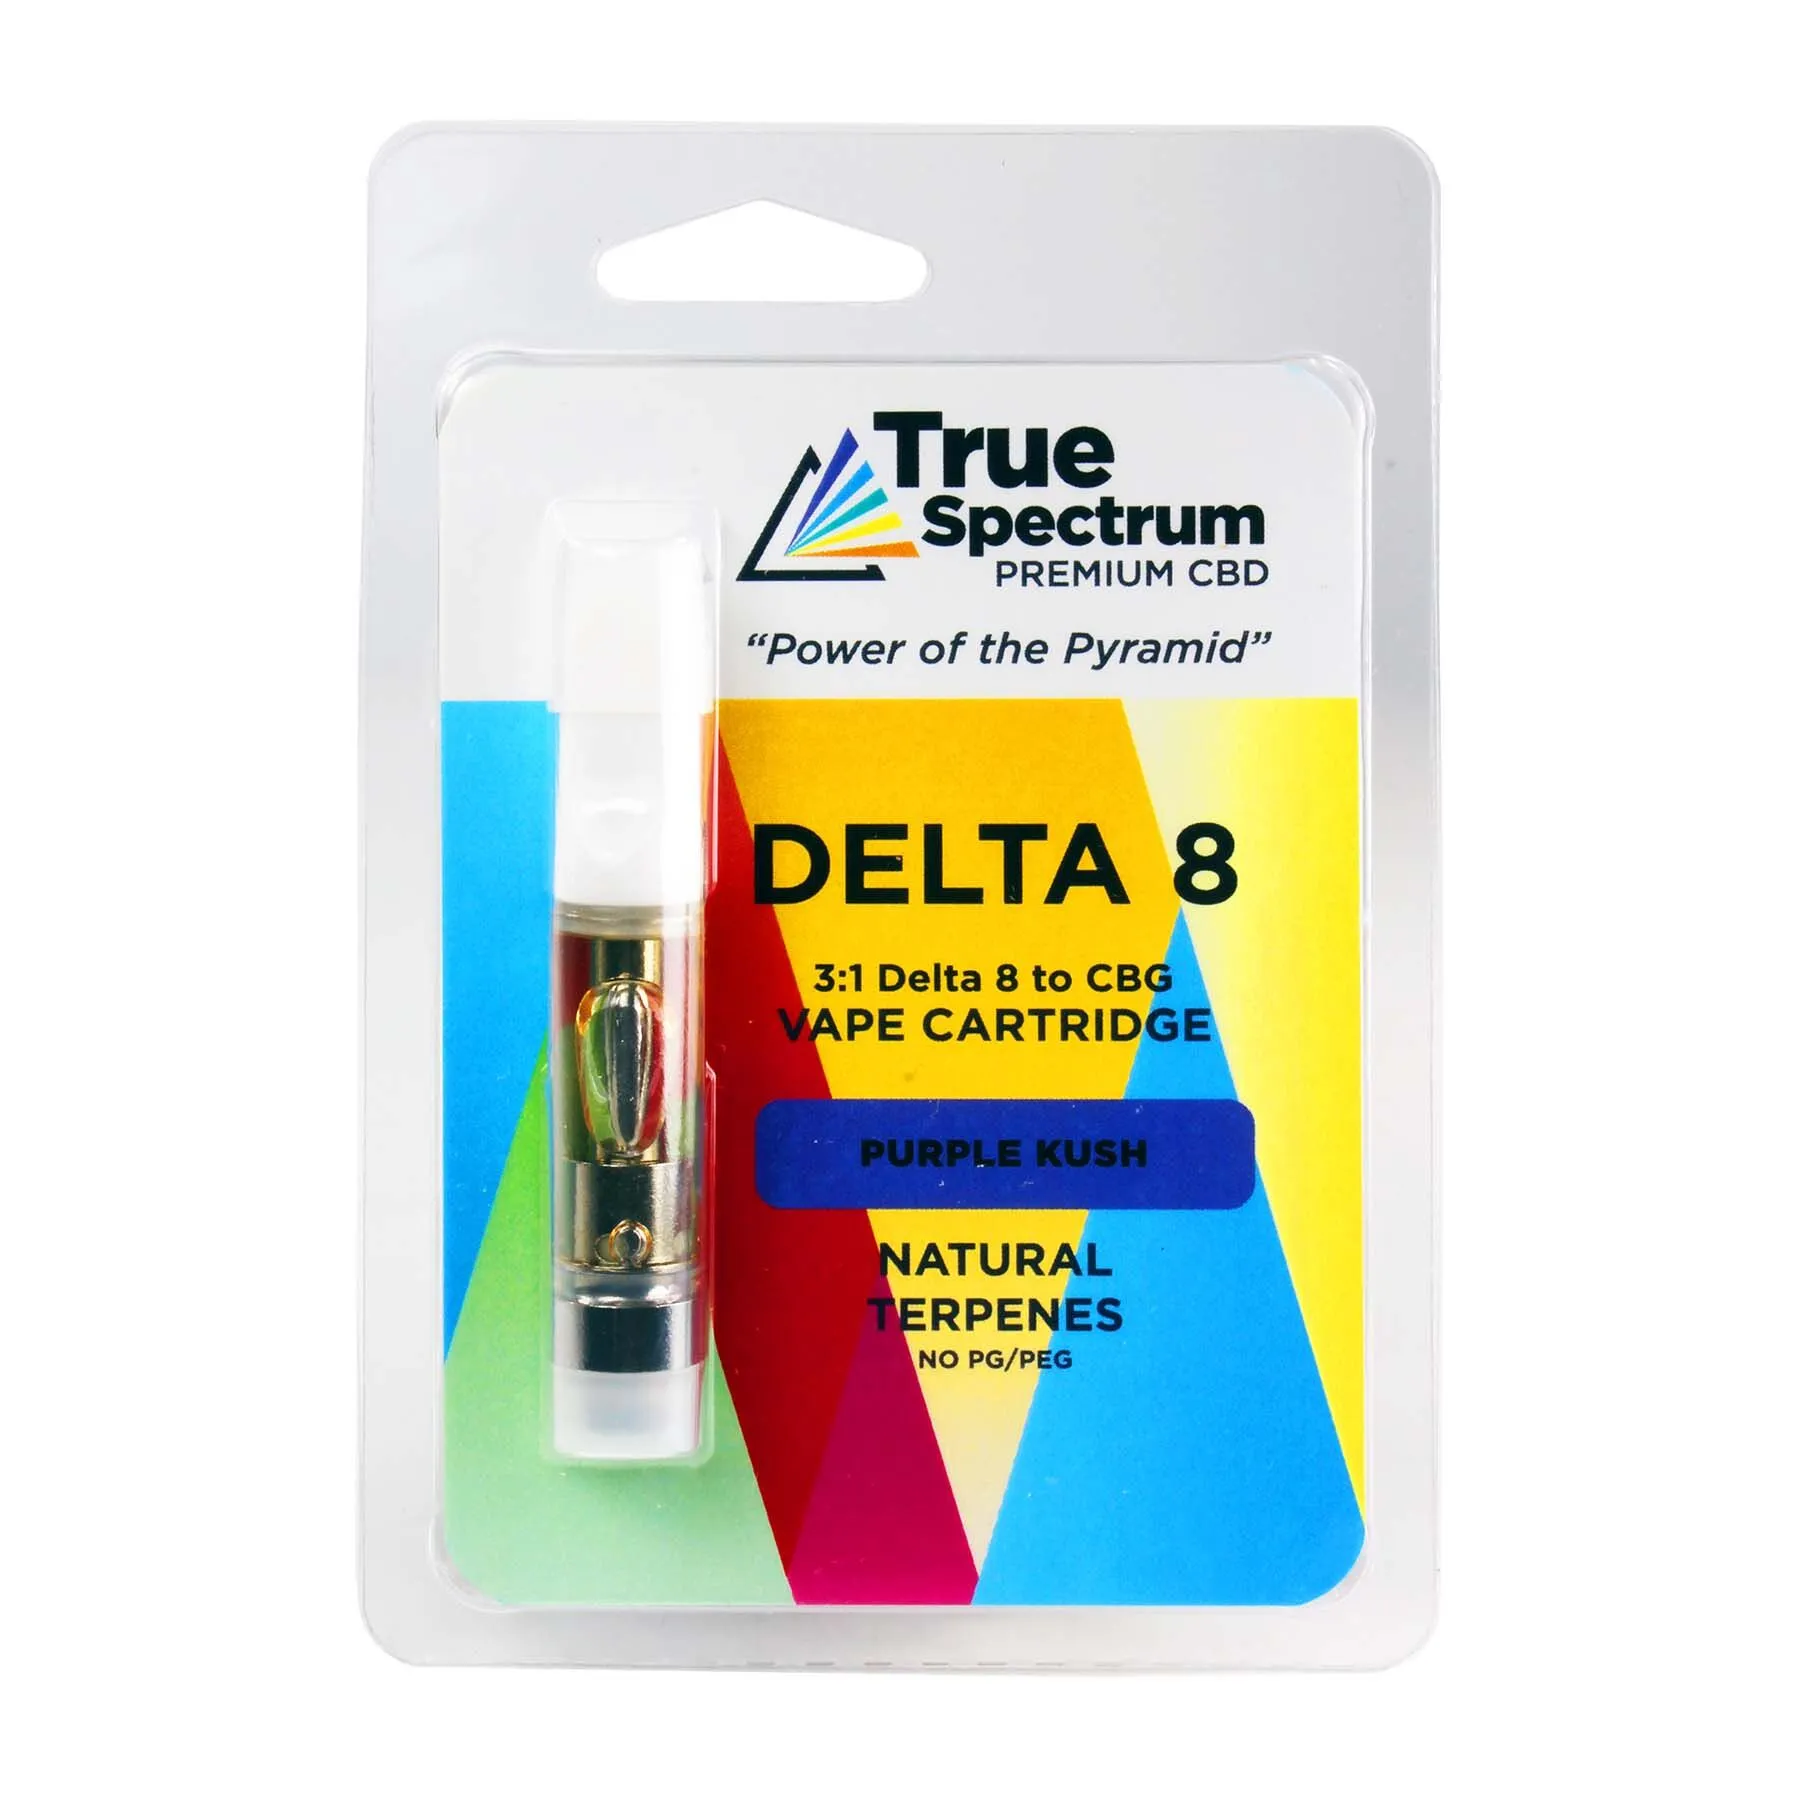 DELTA-8 By My True Spectrum-The Ultimate Comprehensive Review of Top-notch DELTA-8 Products